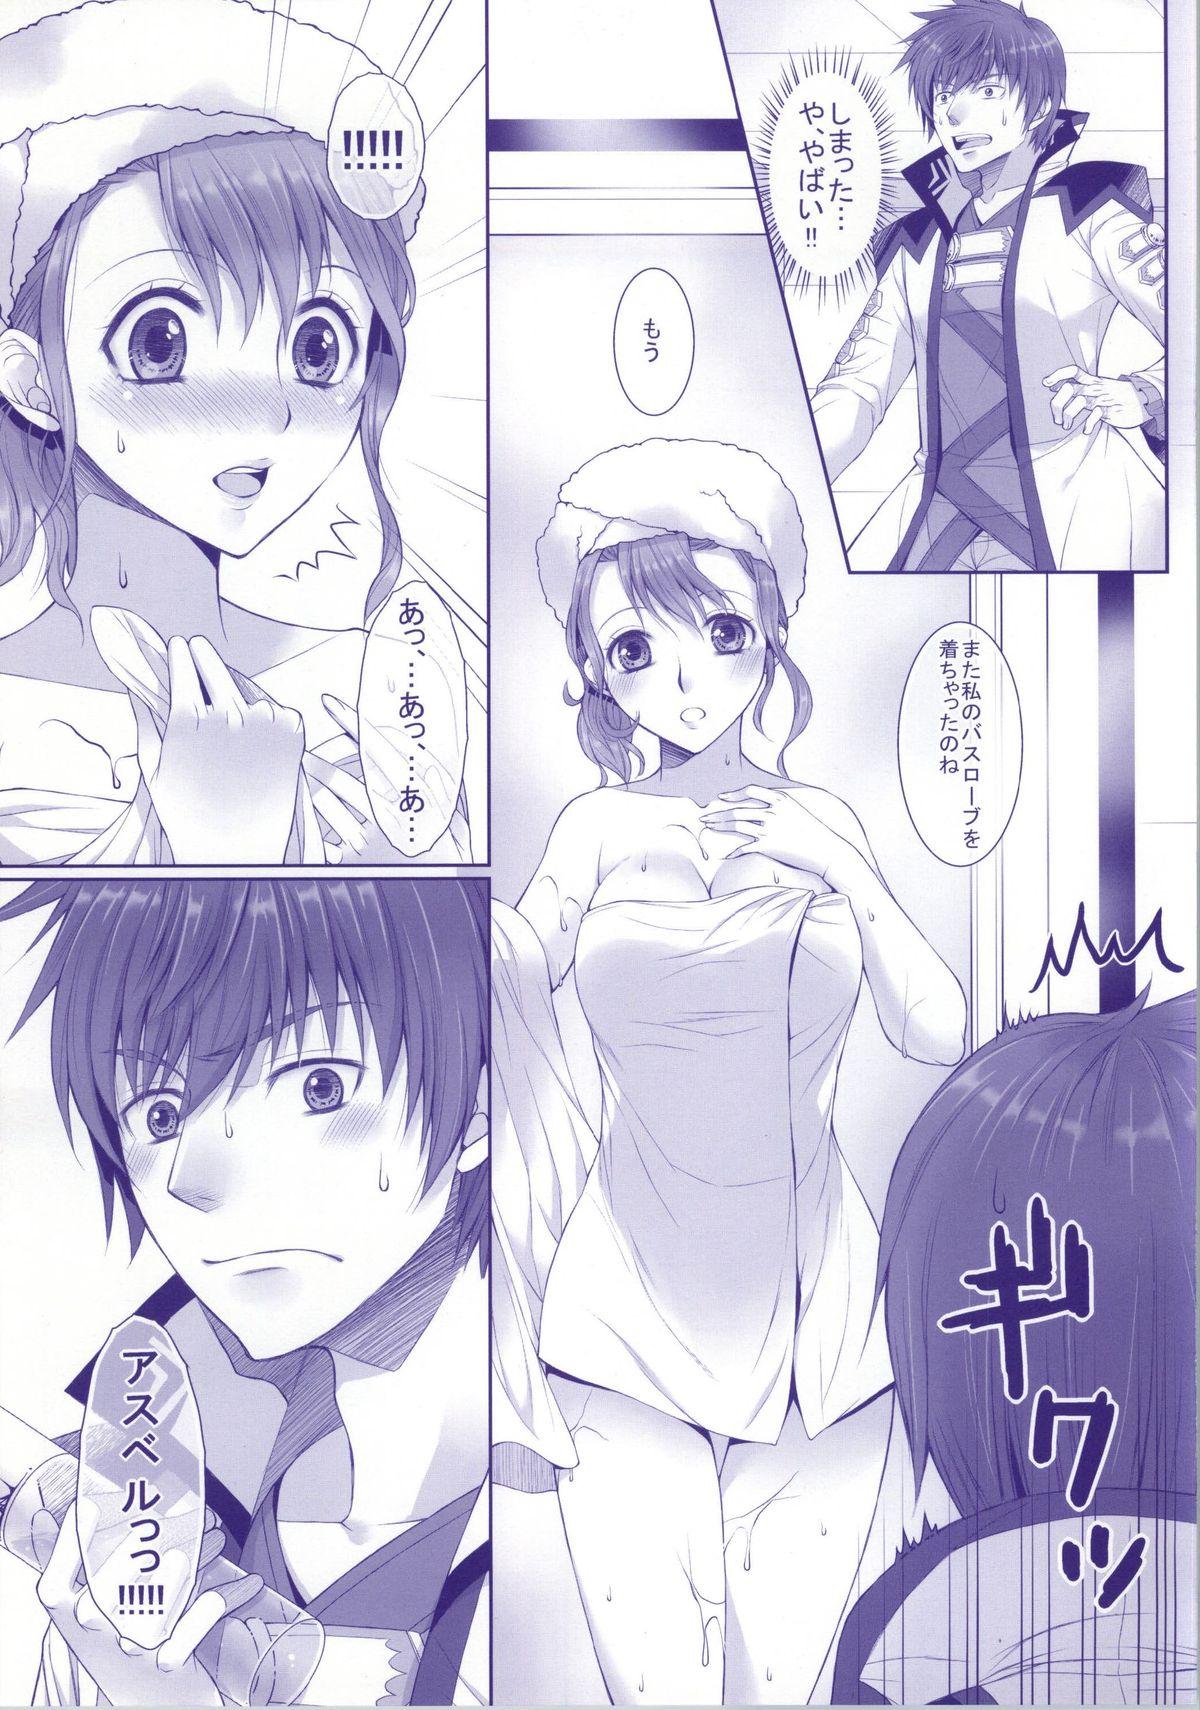 Orgy my favorite flower - Tales of graces Peitos - Page 6